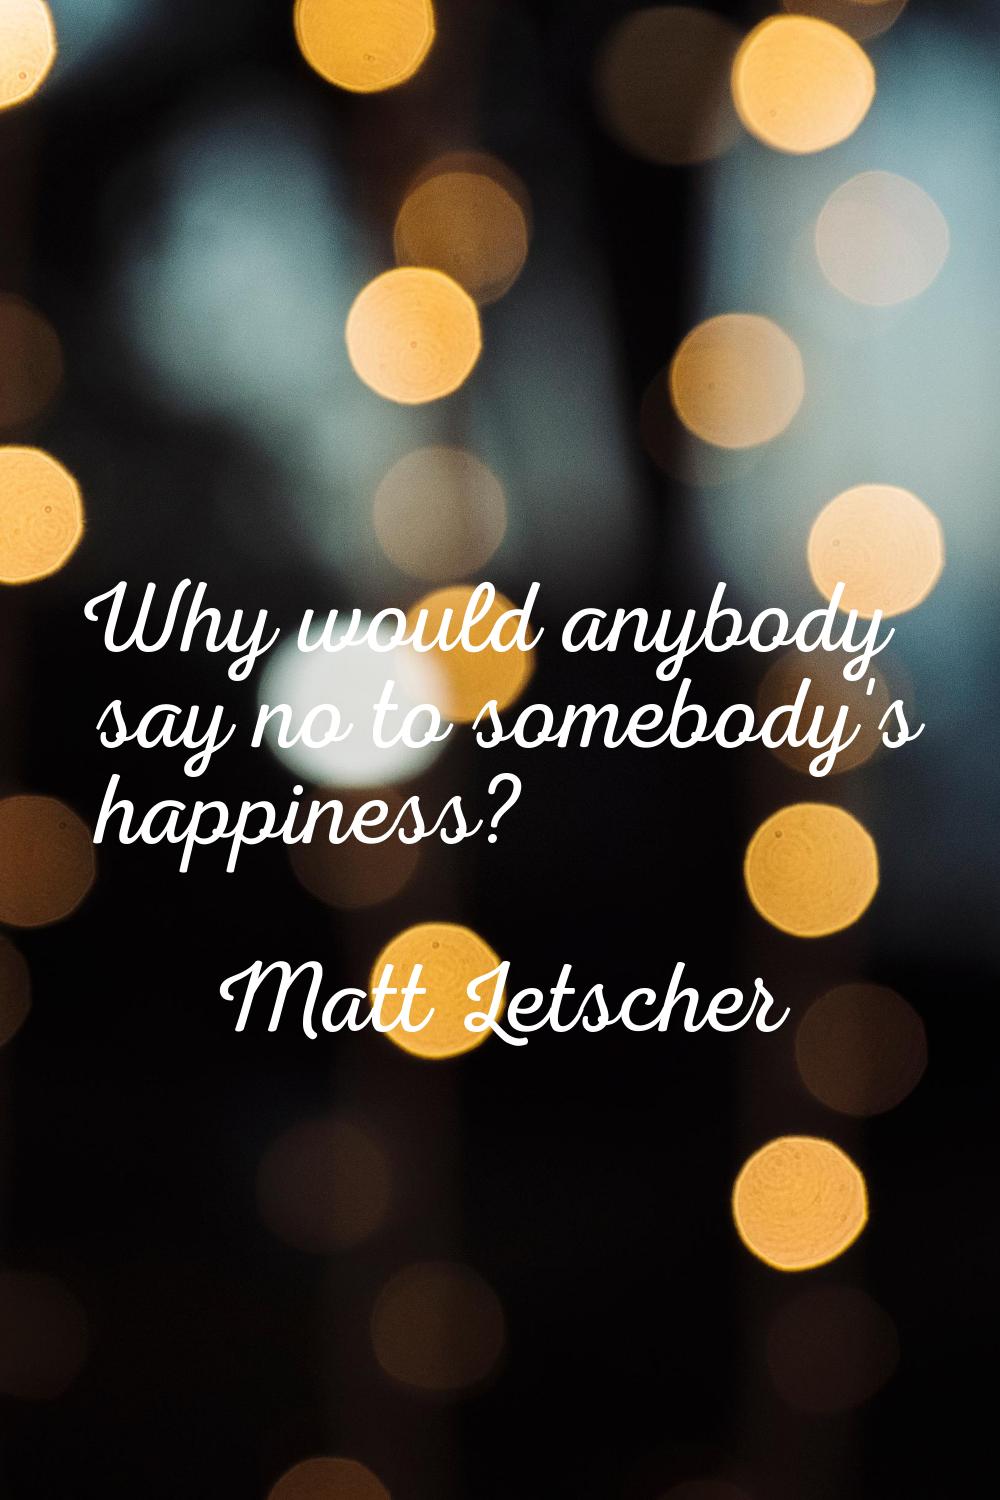 Why would anybody say no to somebody's happiness?